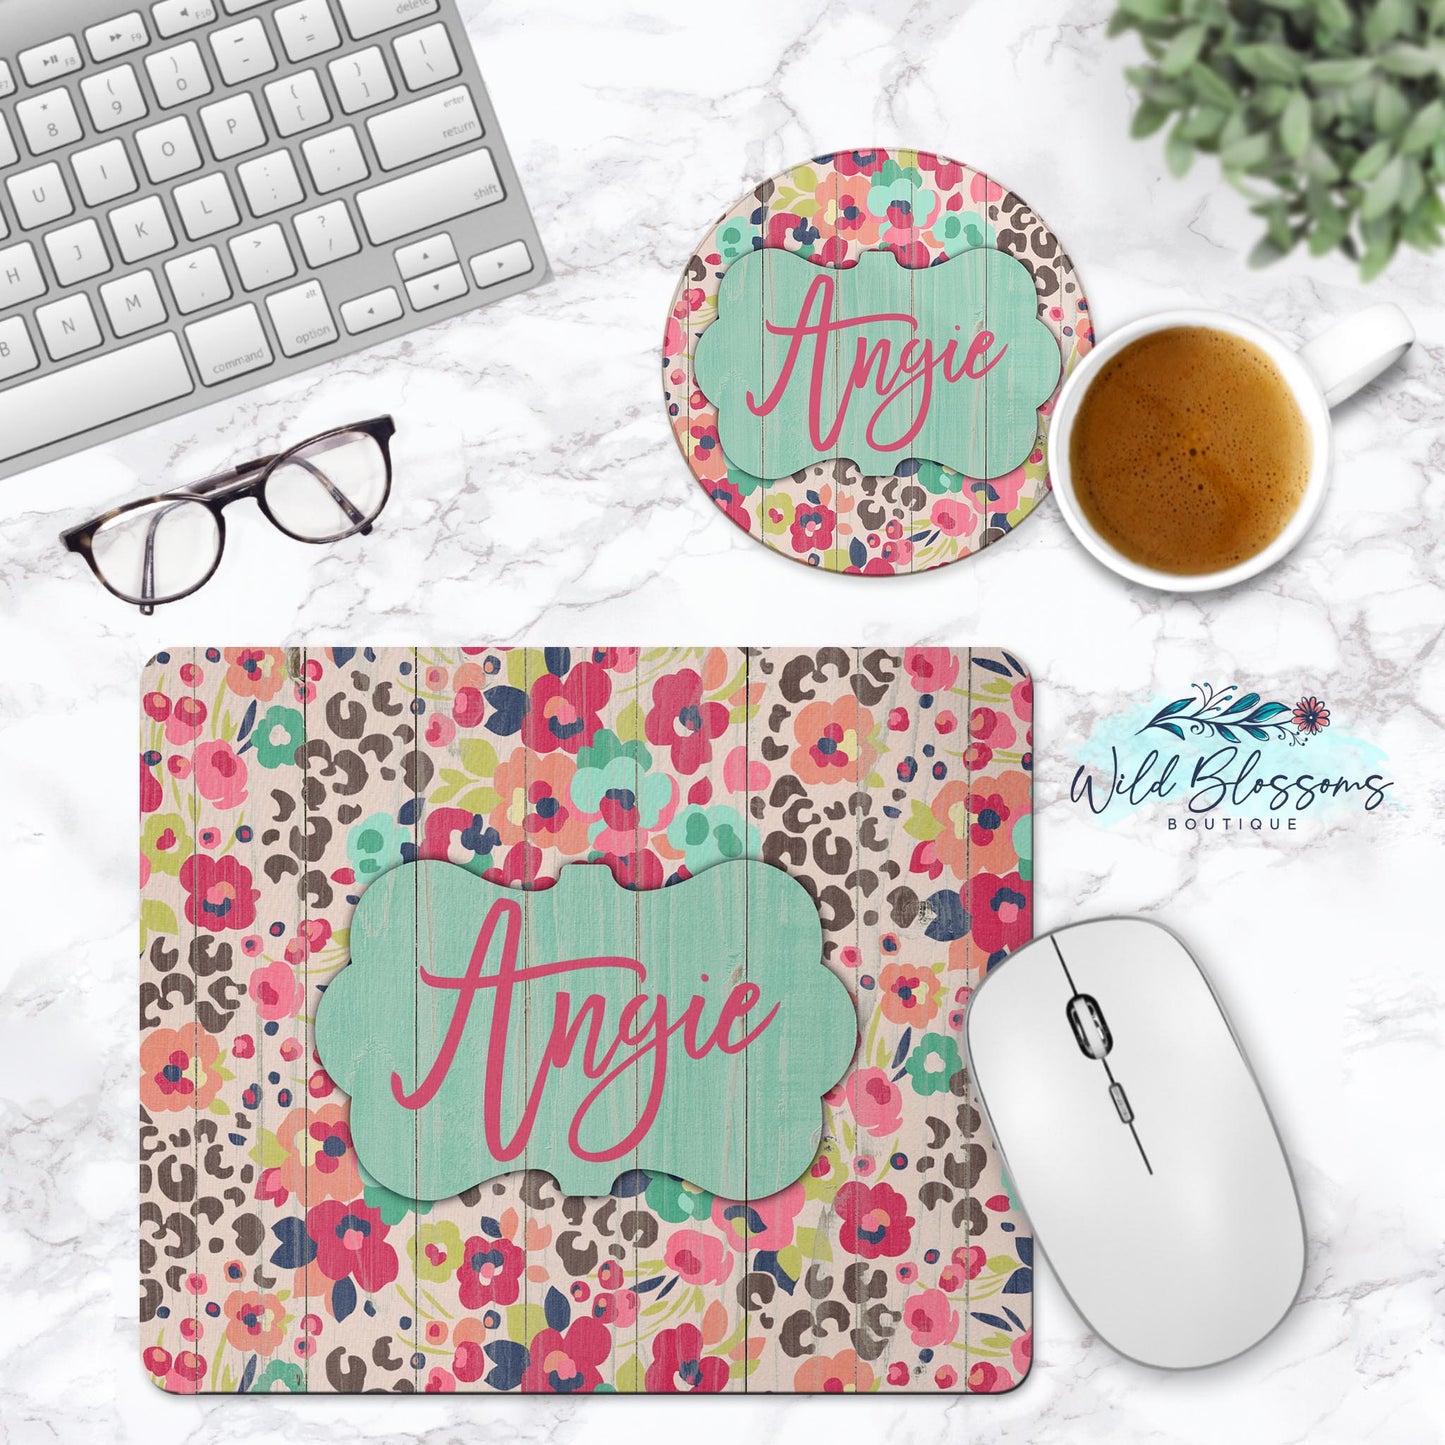 Wooden Floral Leopard Print Personalized Mouse Pad And Coaster Desk Set